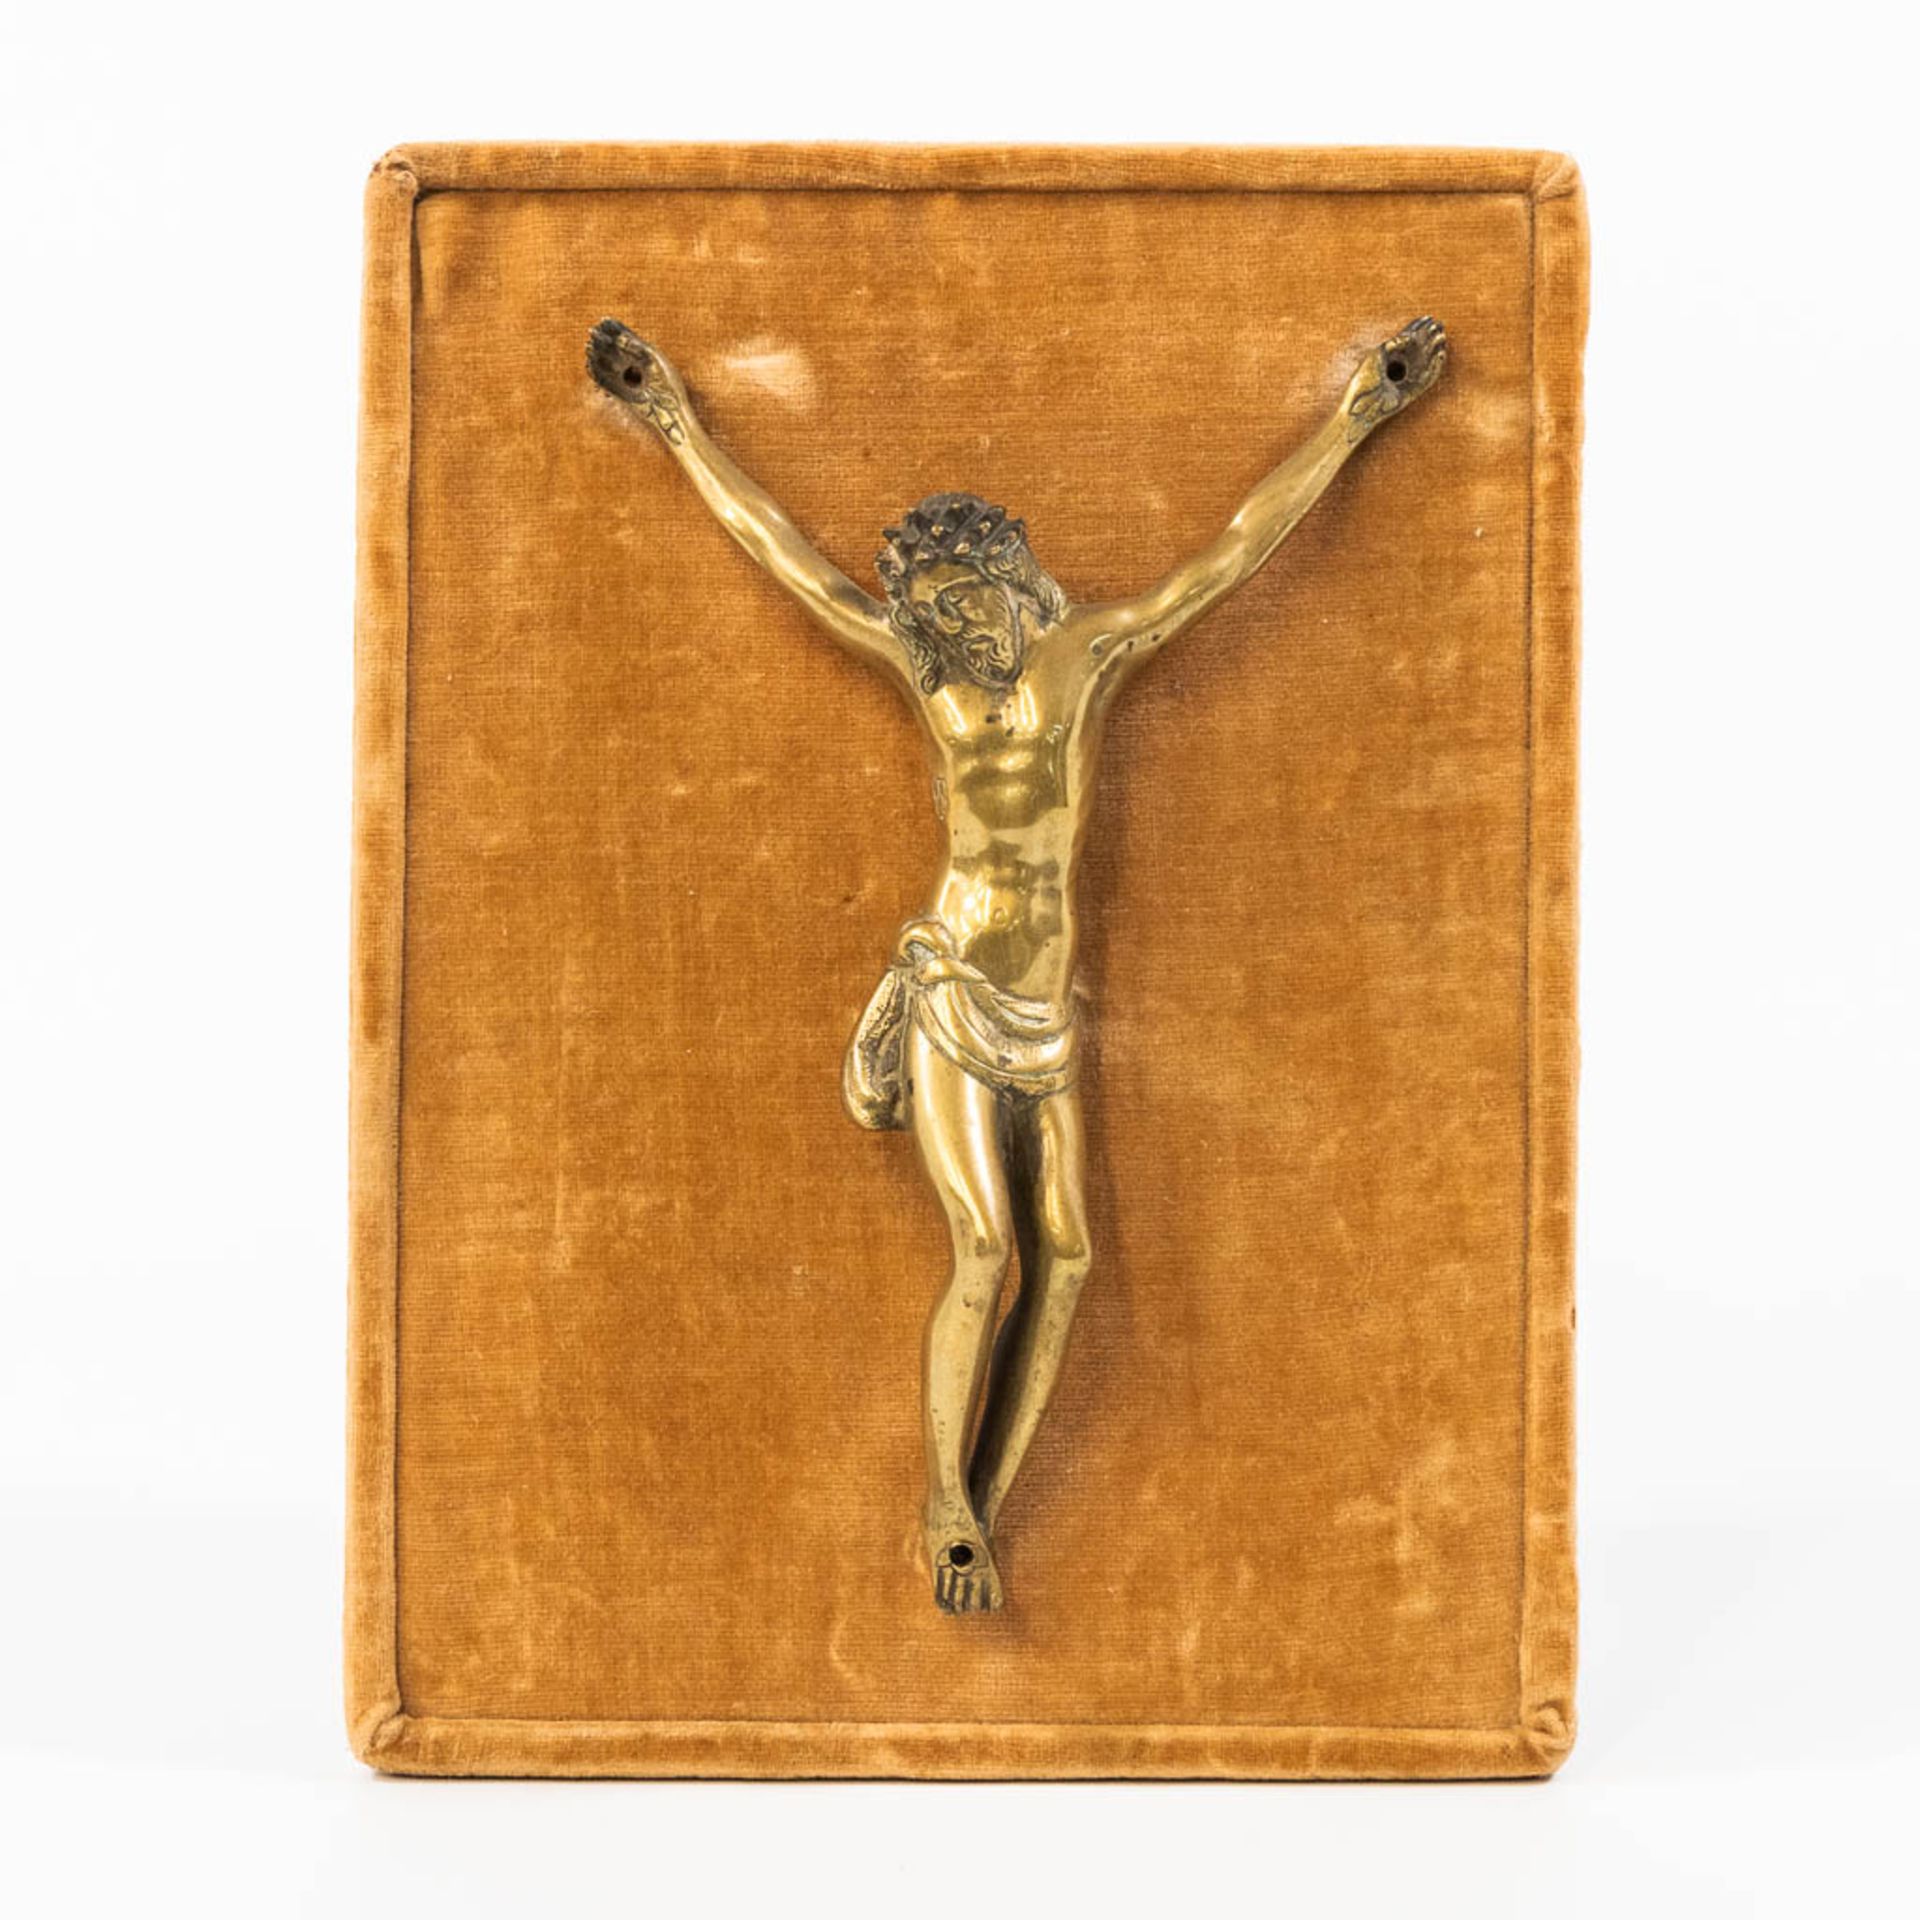 A corpus in Flemish renaissance, most likely second half of the 16th century. (3 x 10,5 x 16 cm)